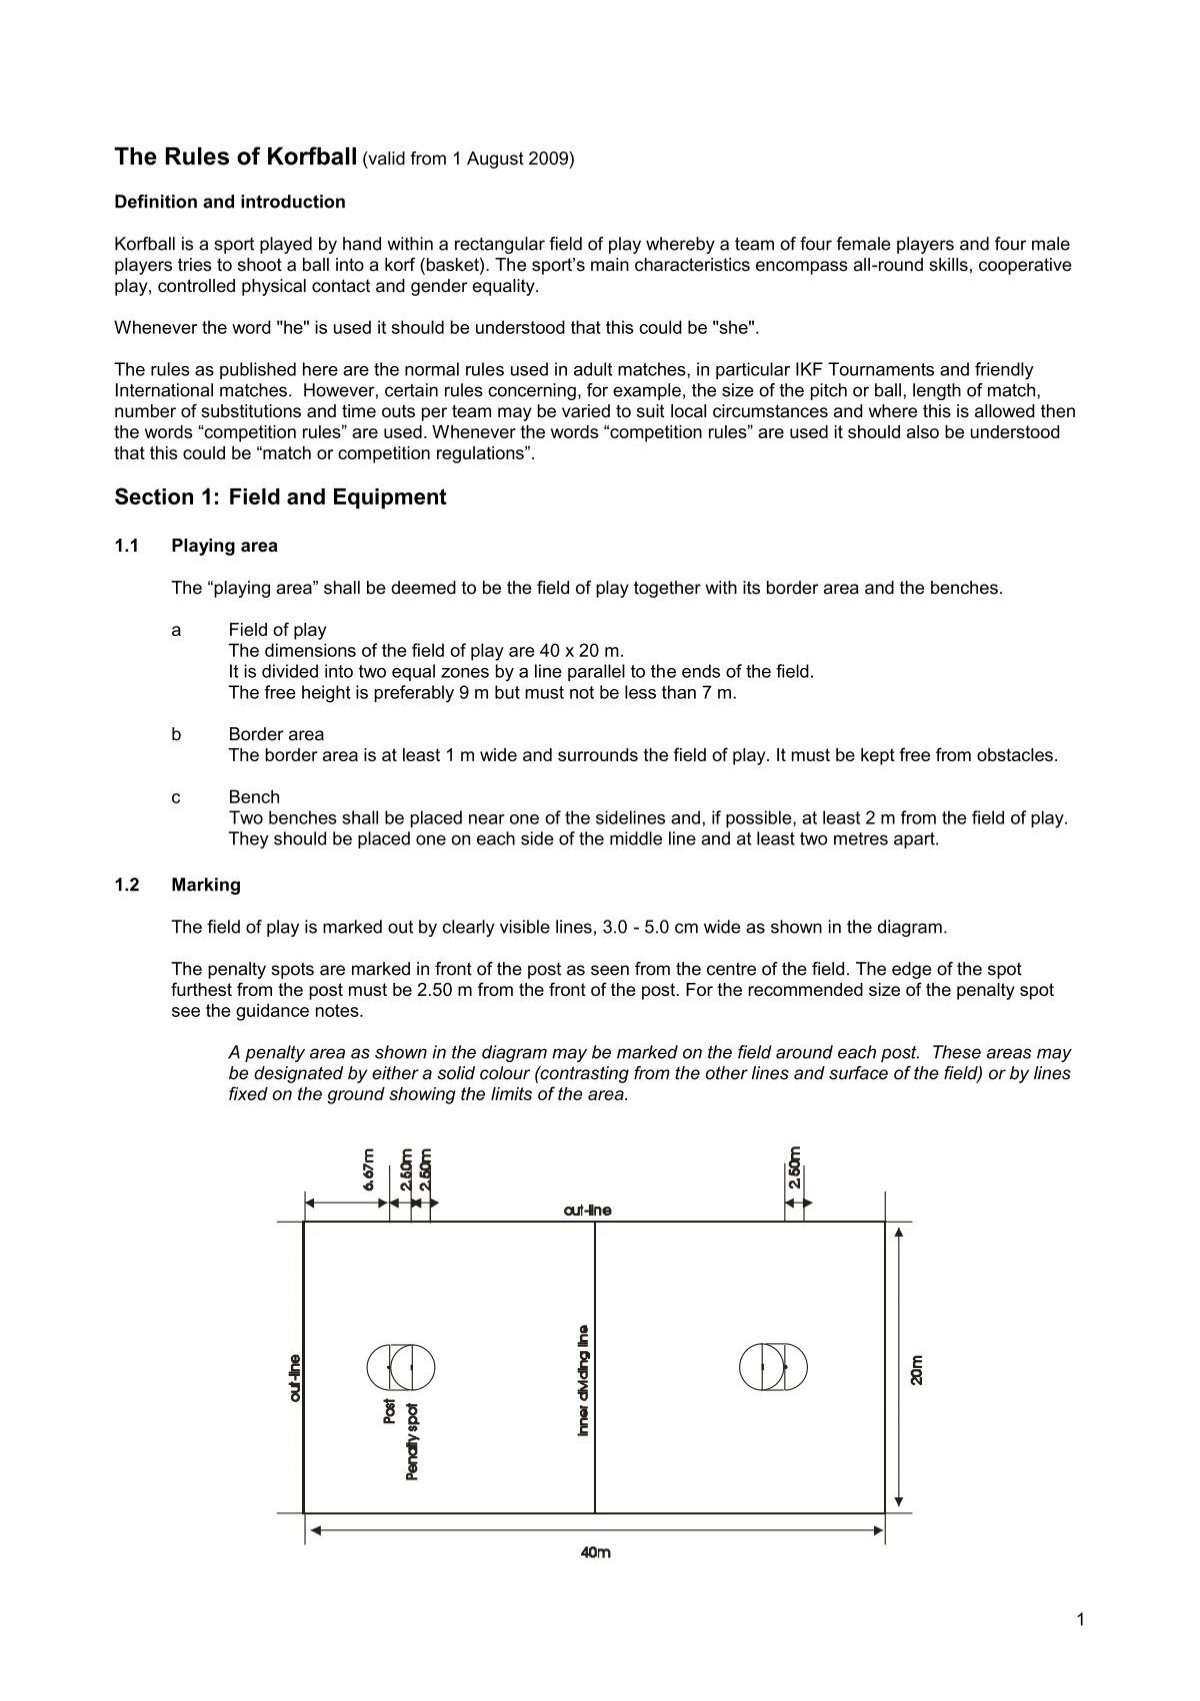 The Rules of Korfball (valid from 1 August 2009)